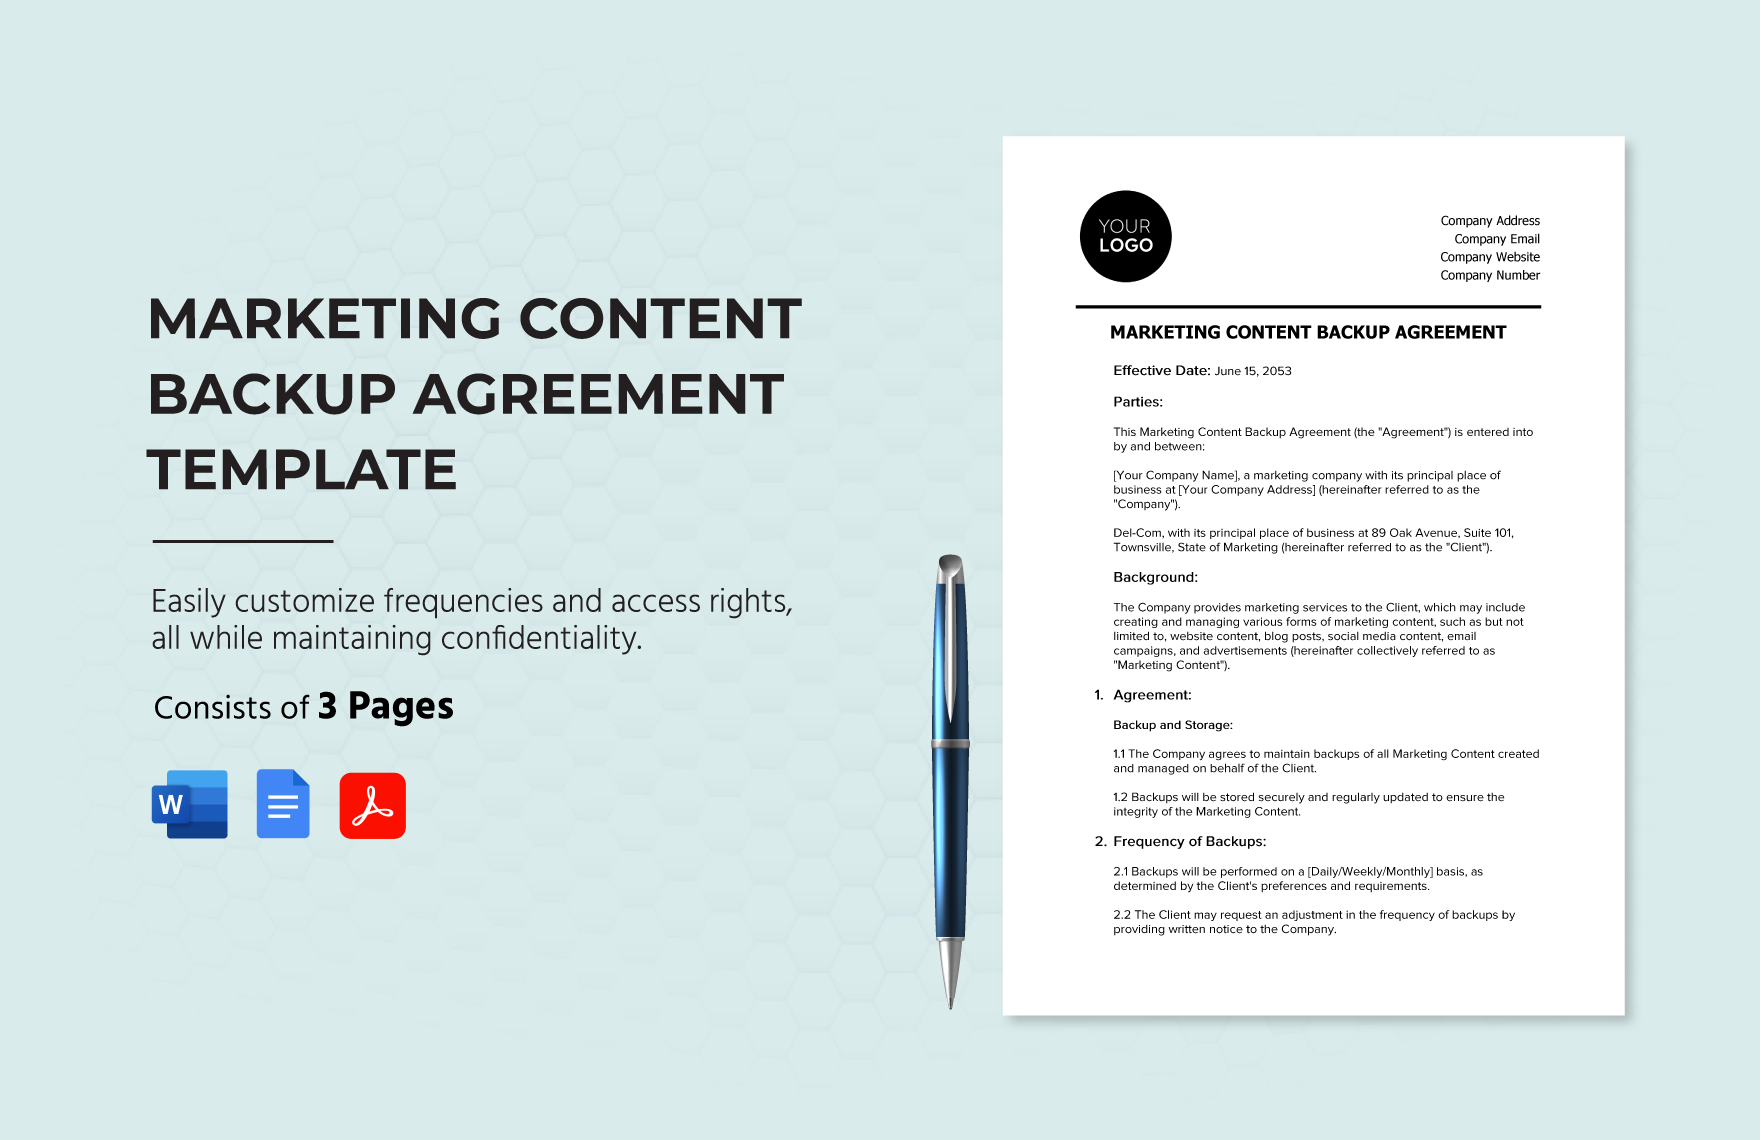 Marketing Content Backup Agreement Template in Word, Google Docs, PDF